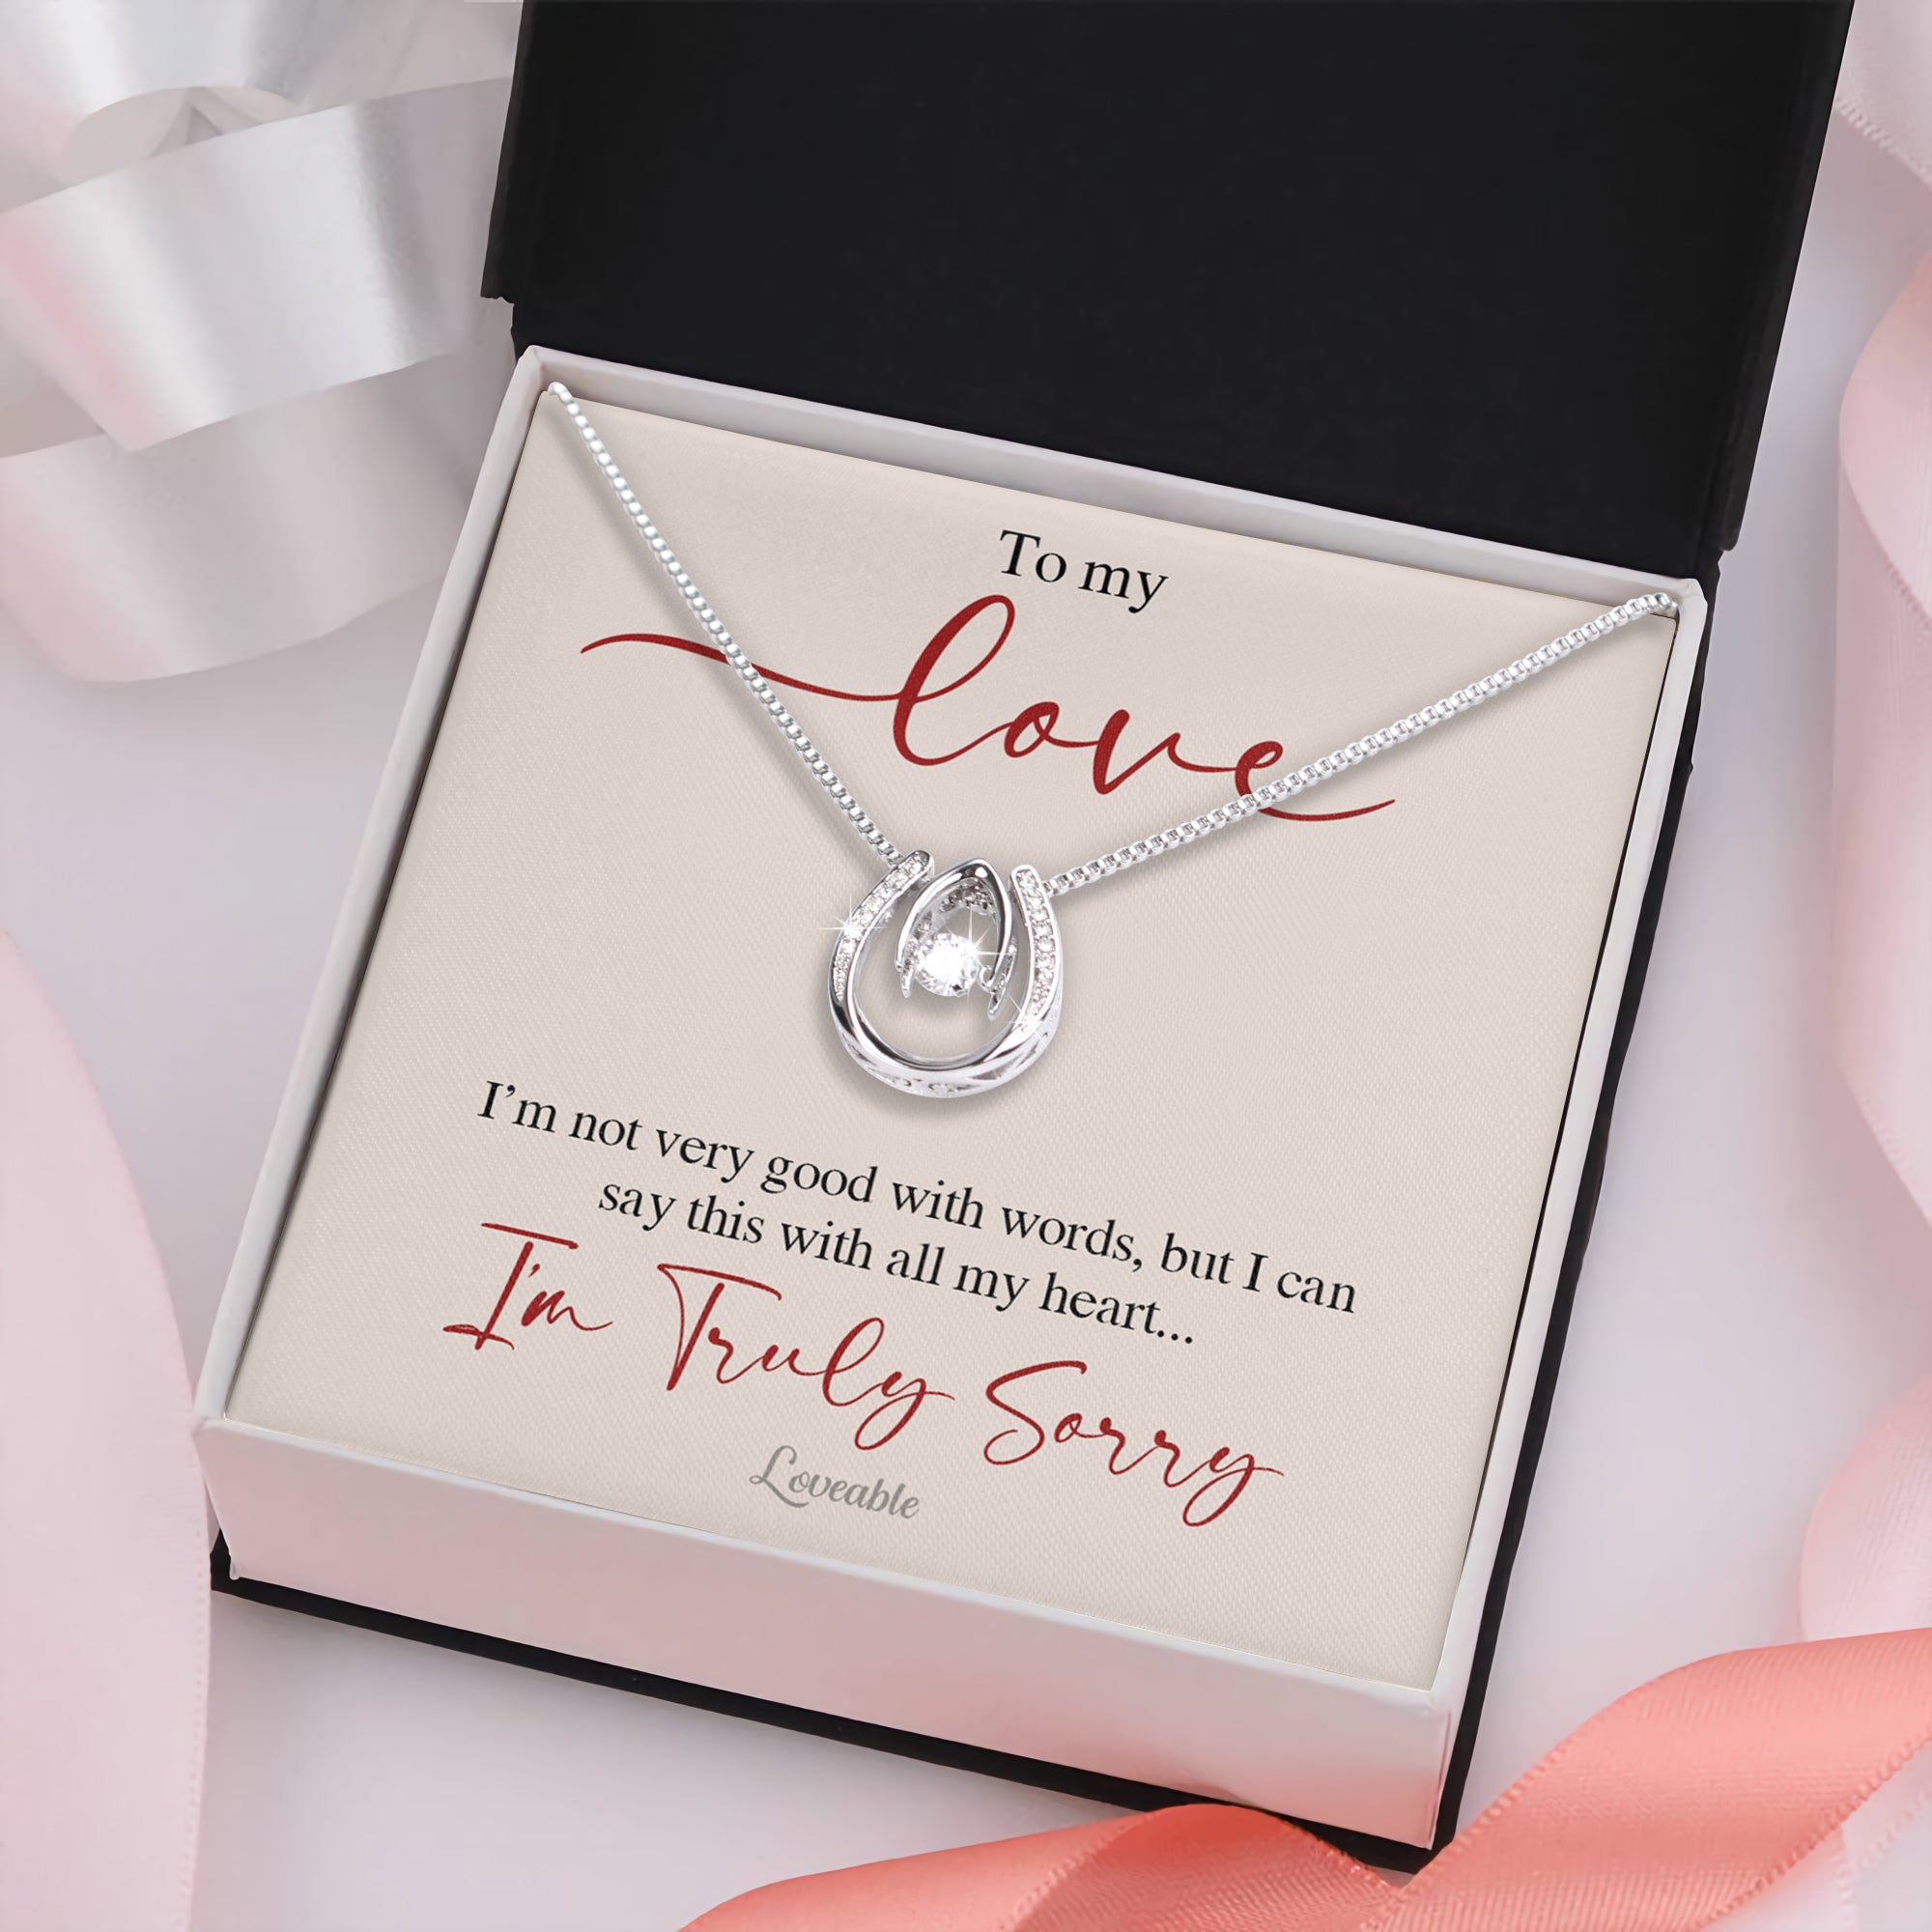 To my Love, I'm Truly Sorry - Best Sorry Gifts for Her